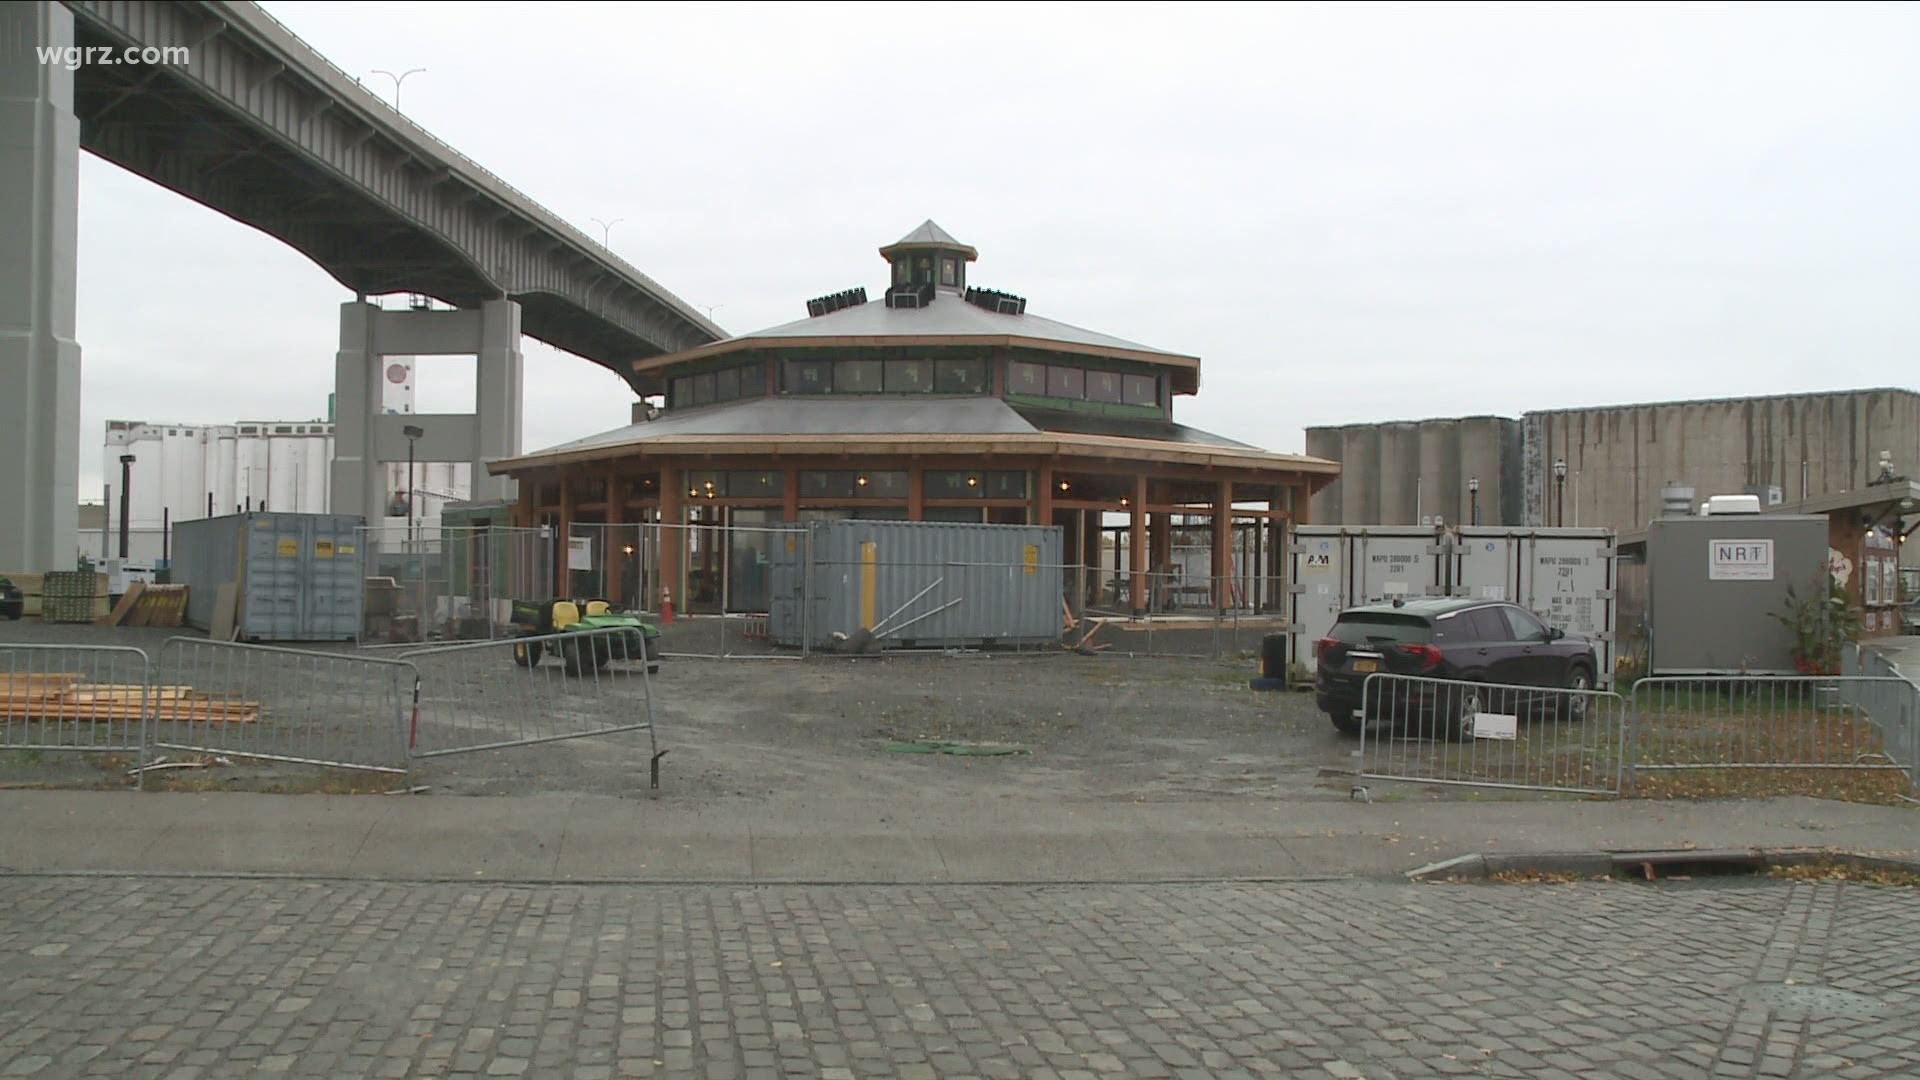 Canalside carousel getting a solar roof